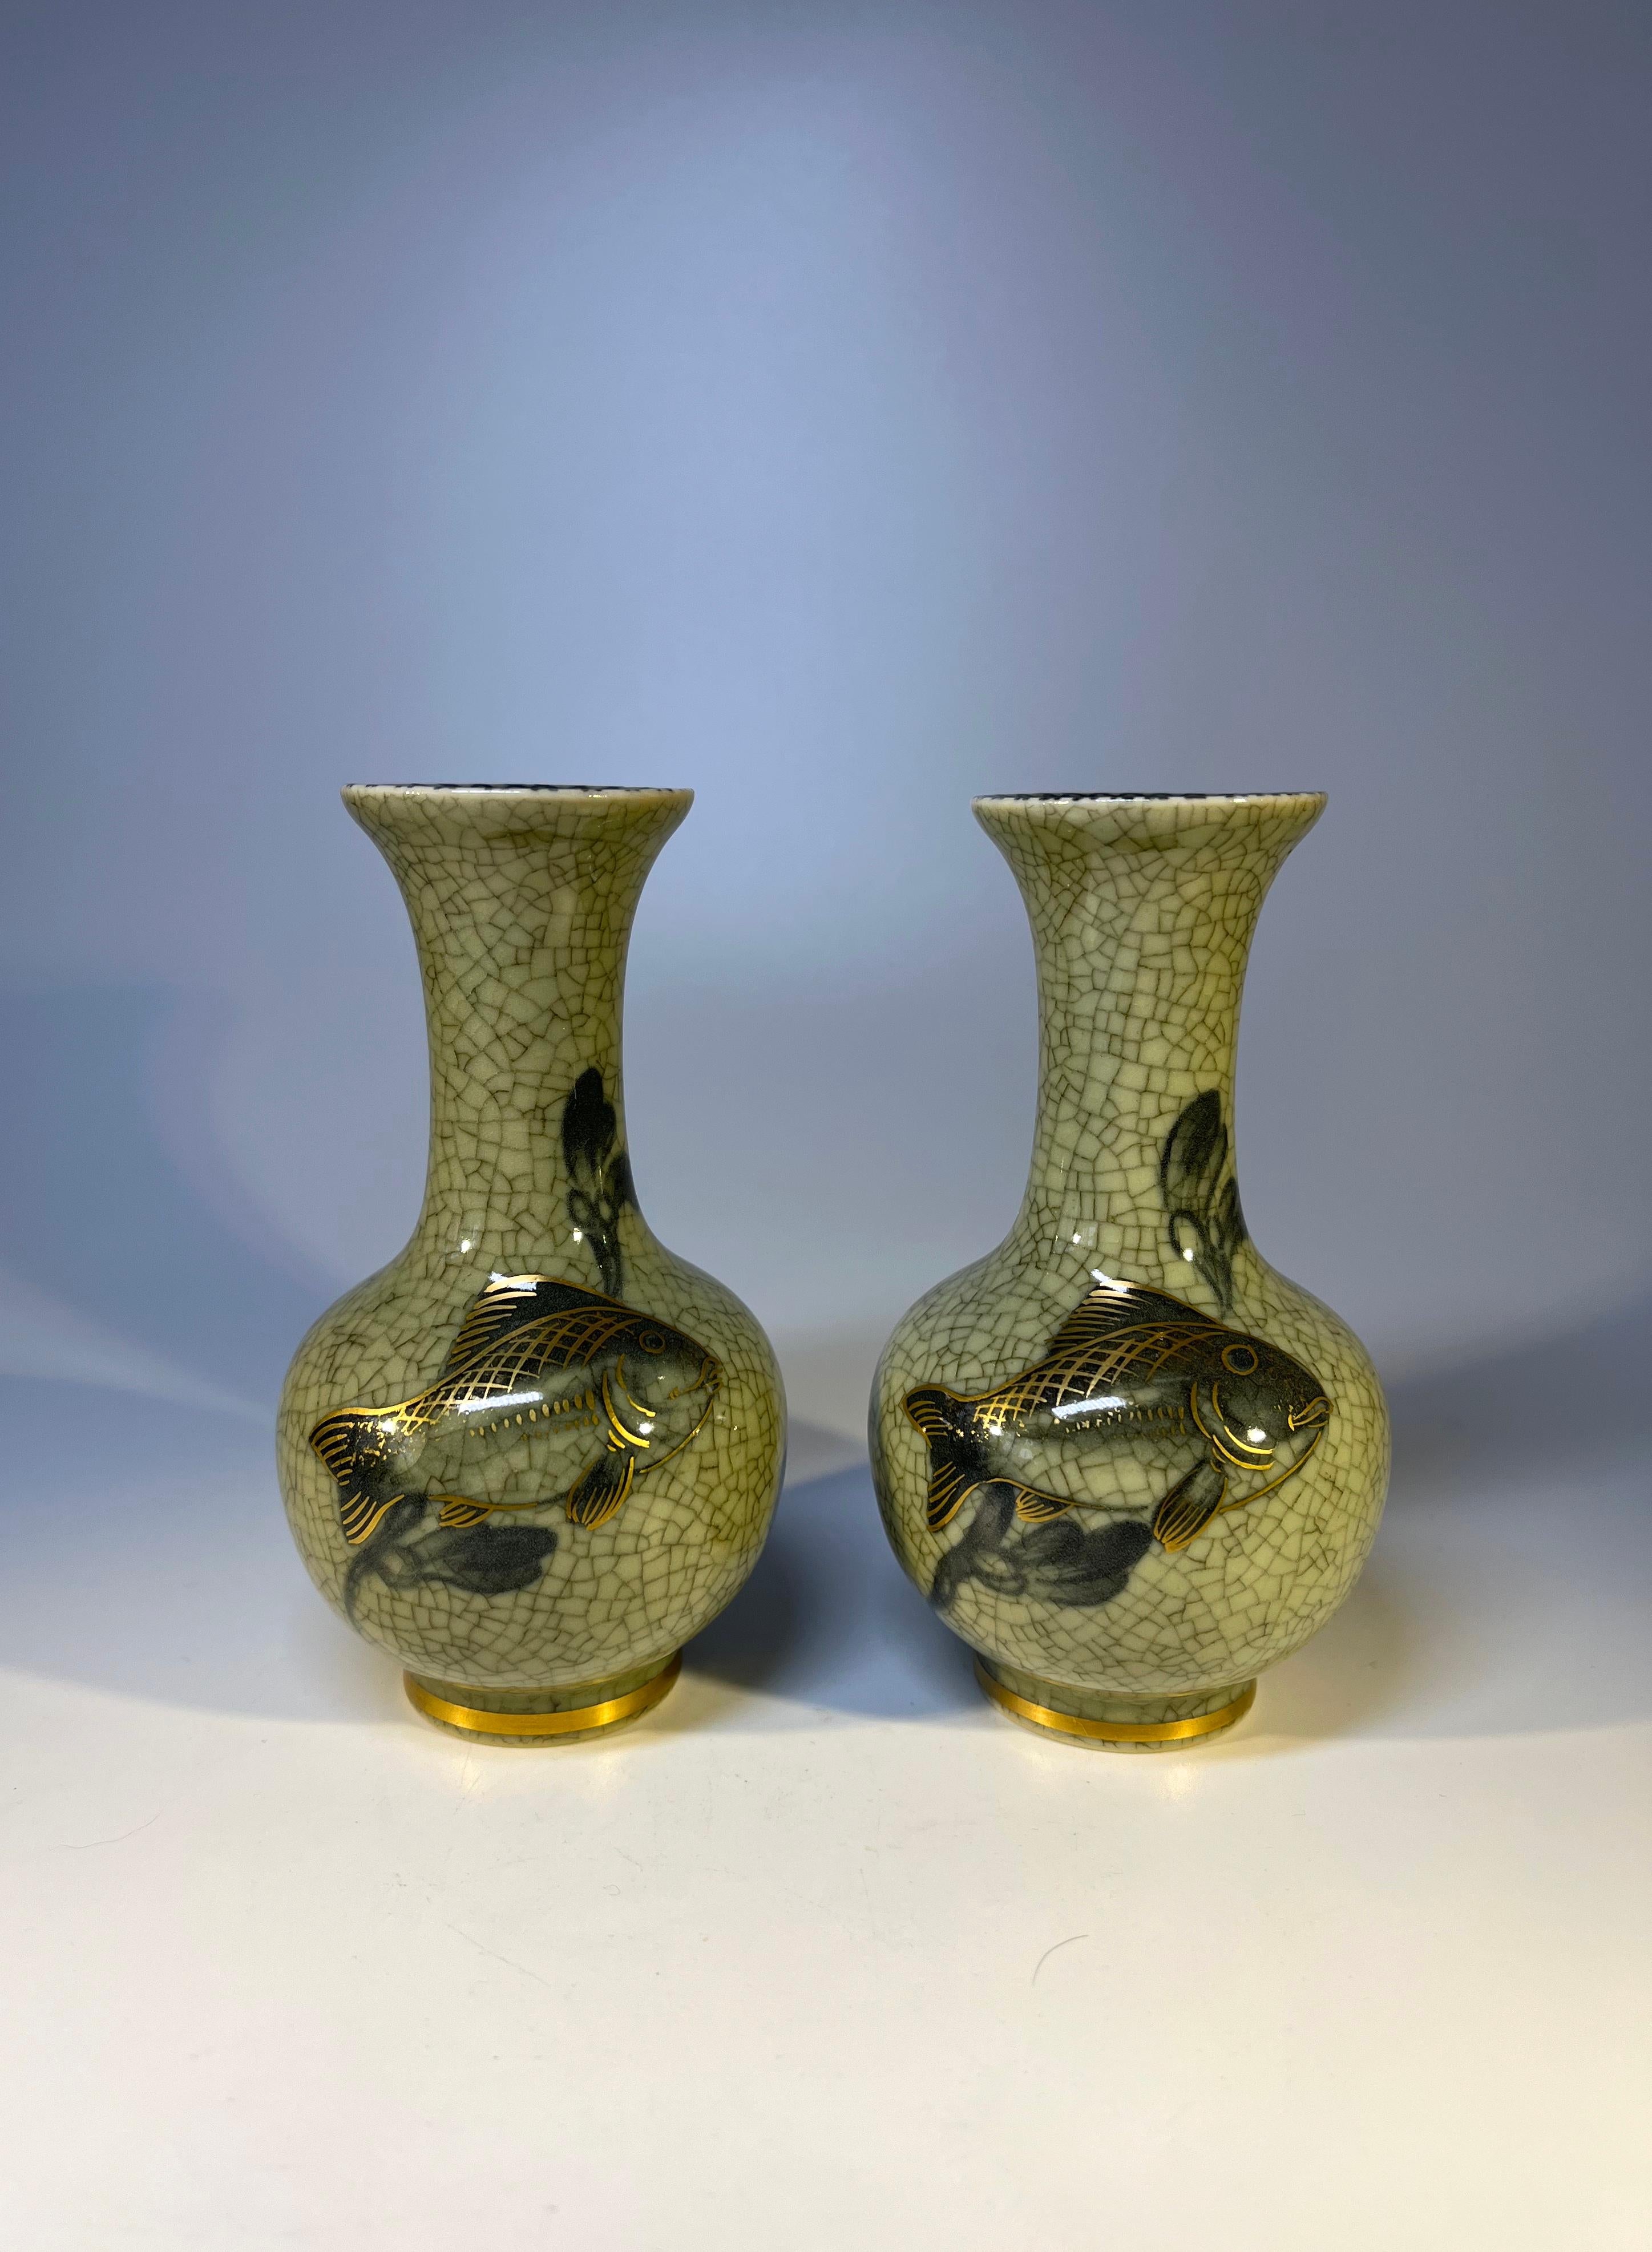 Delightful pair of Royal Copenhagen porcelain grey green crackle glaze bud vases
Hand applied gilded fish decoration and gilded bands on base
Circa 1960
Stamped and numbered 1554
Measures: Height 4.75 inch, Diameter 2.5 inch
In excellent